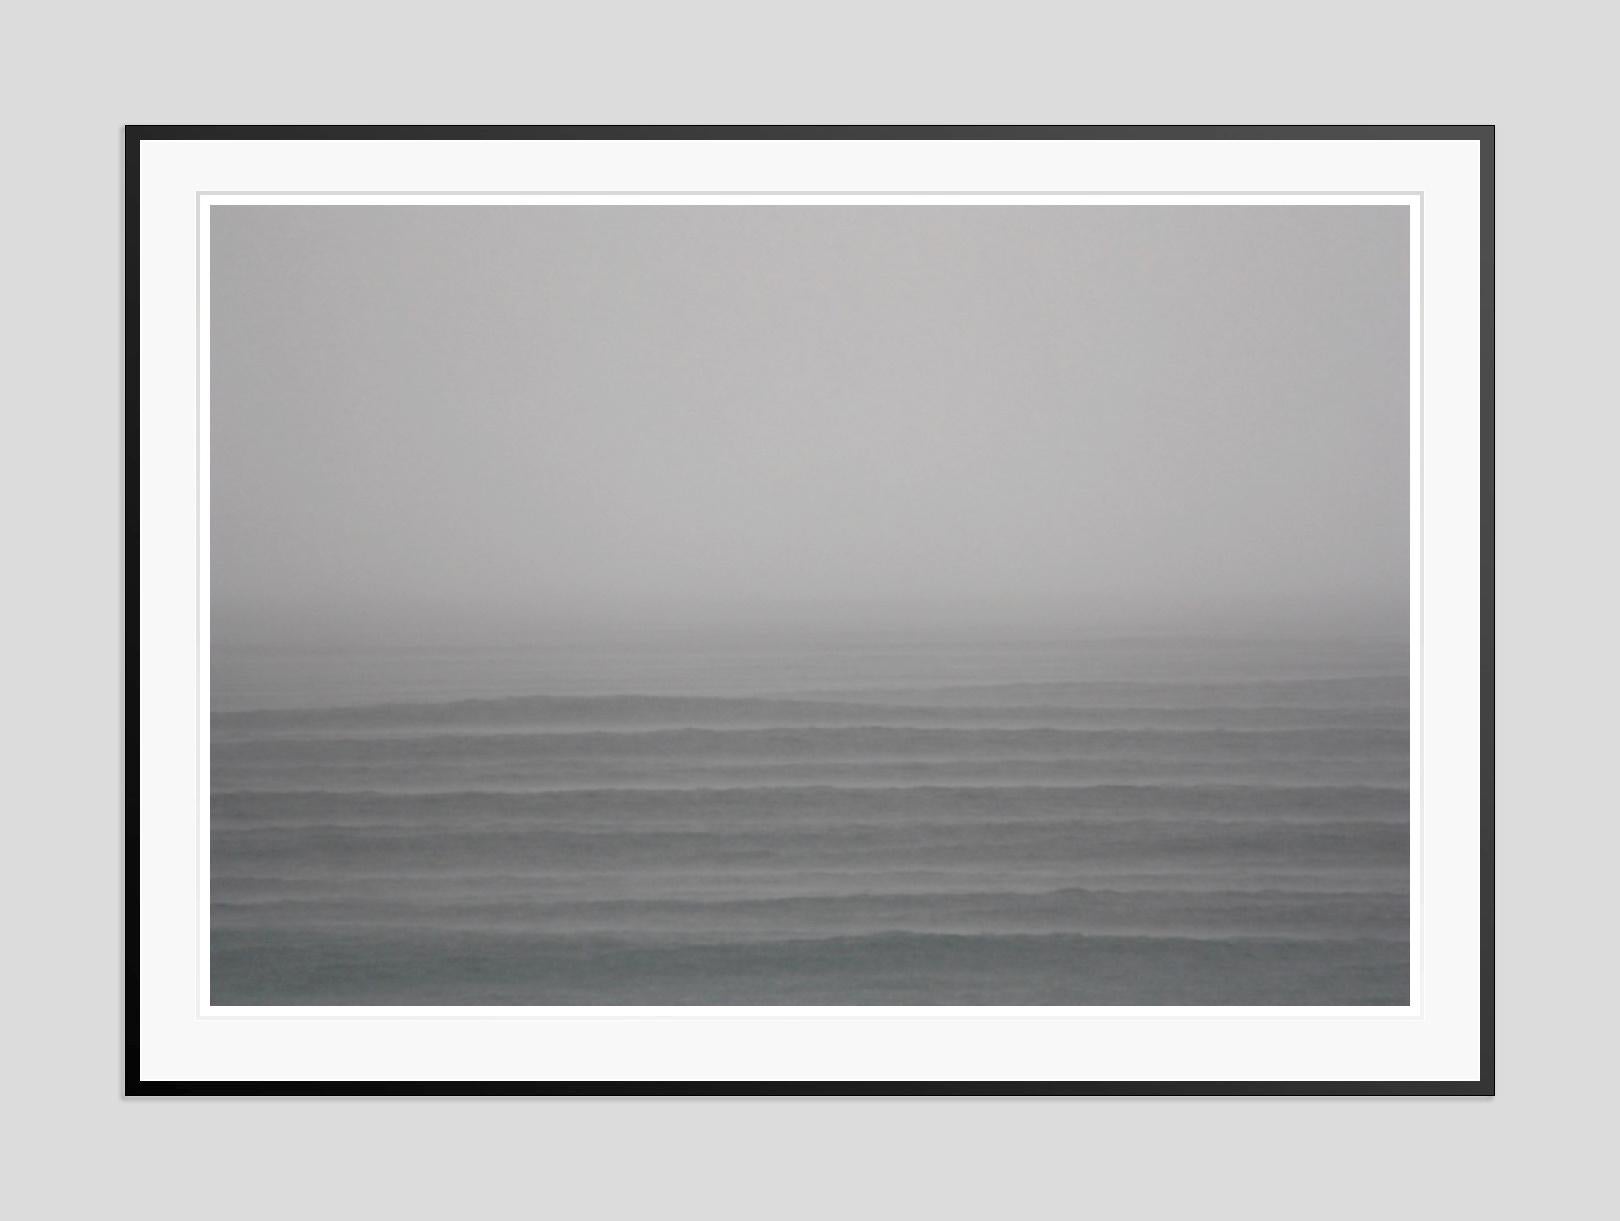 Calm Sea -  Oversize Signed Limited Edition Print  - Photograph by Stuart Möller